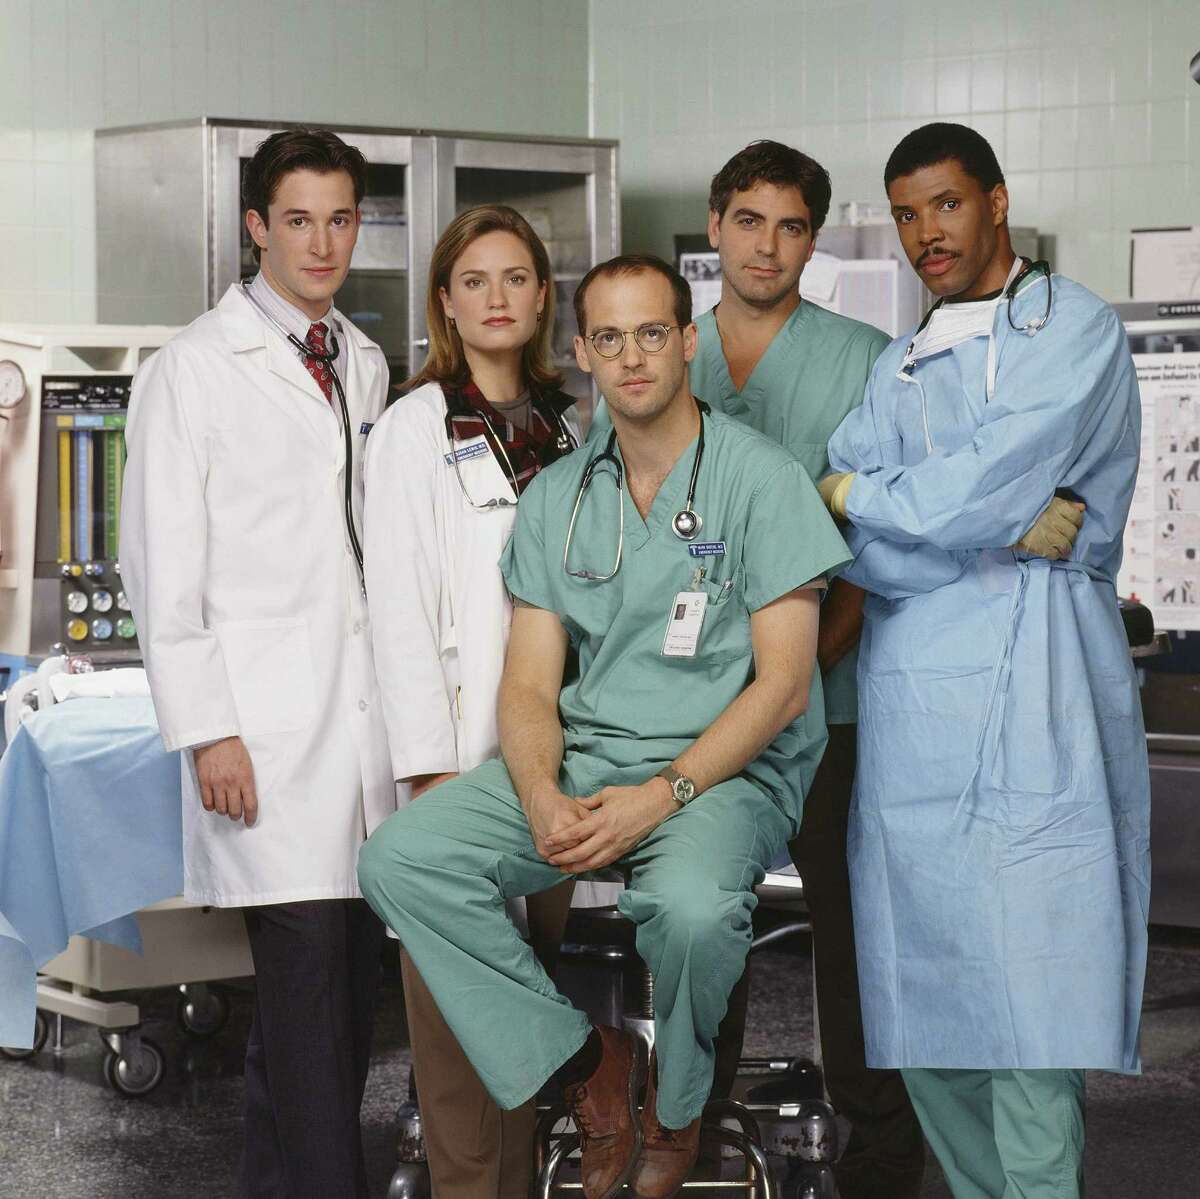 "ER" debuted on NBC on Sept. 19, 1994, ushering in one of the most popular medical dramas in TV history. Here's a look at what the cast is up to now, in honor of the 20th anniversary of "ER's" premiere. Pictured from Season 1 (l-r): Noah Wyle as Dr. John Carter; Sherry Stringfield as Dr. Susan Lewis; Anthony Edwards as Dr. Mark Greene; George Clooney as Dr. Doug Ross; and Eriq La Salle as Dr. Peter Benton. 